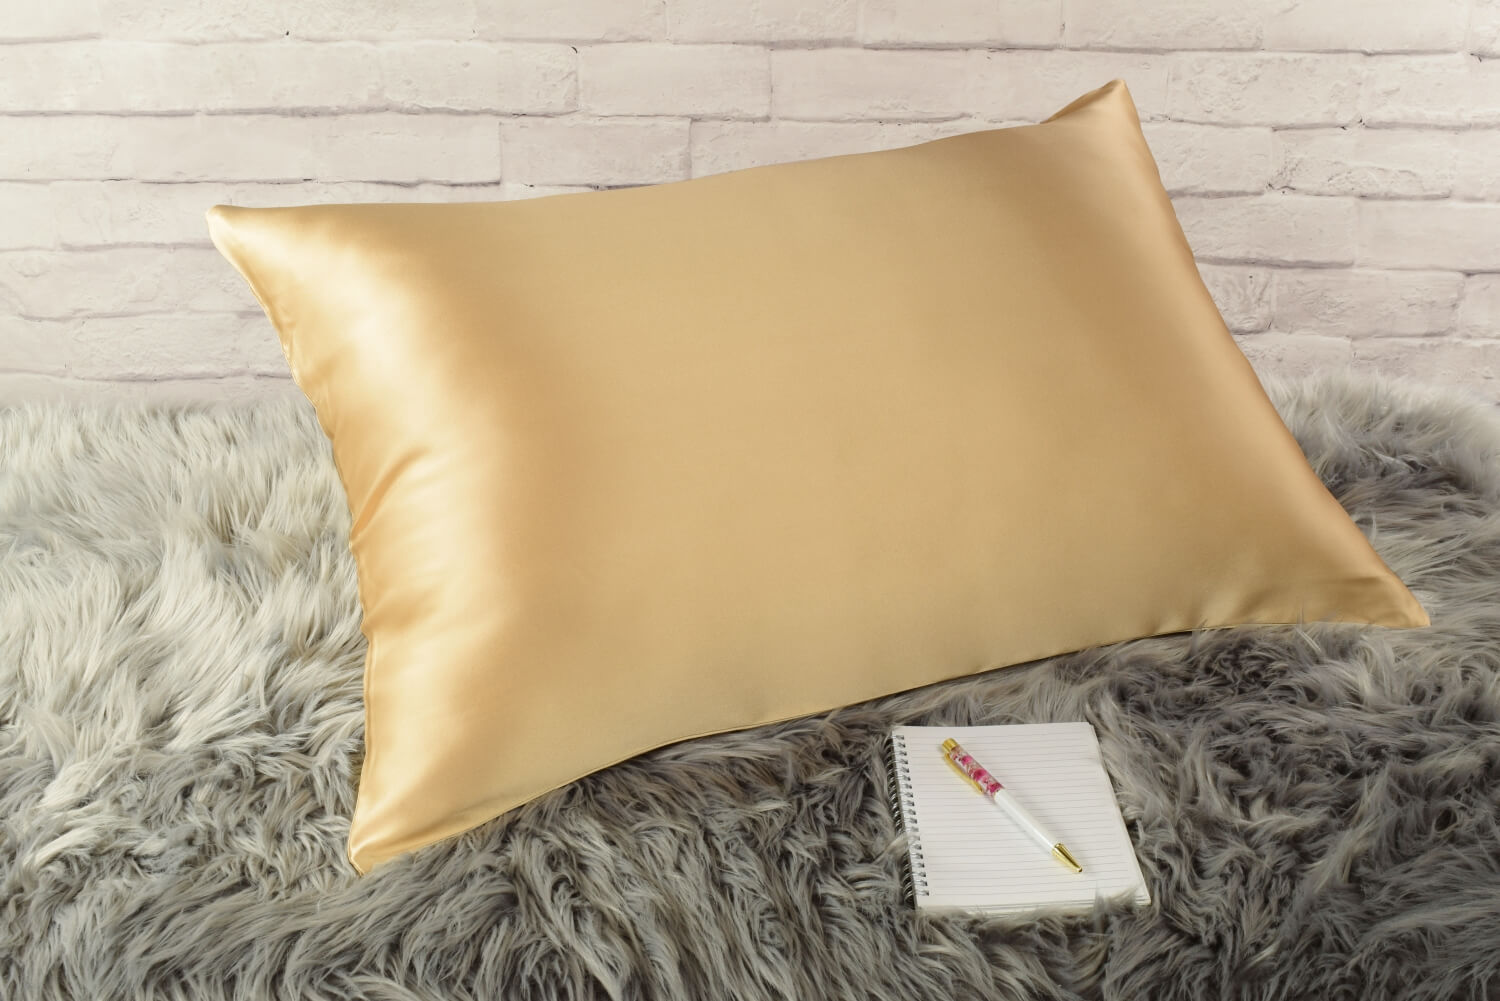 Celestial Silk 25 momme gold silk pillowcase on faux fur rug with notebook and pretty pen